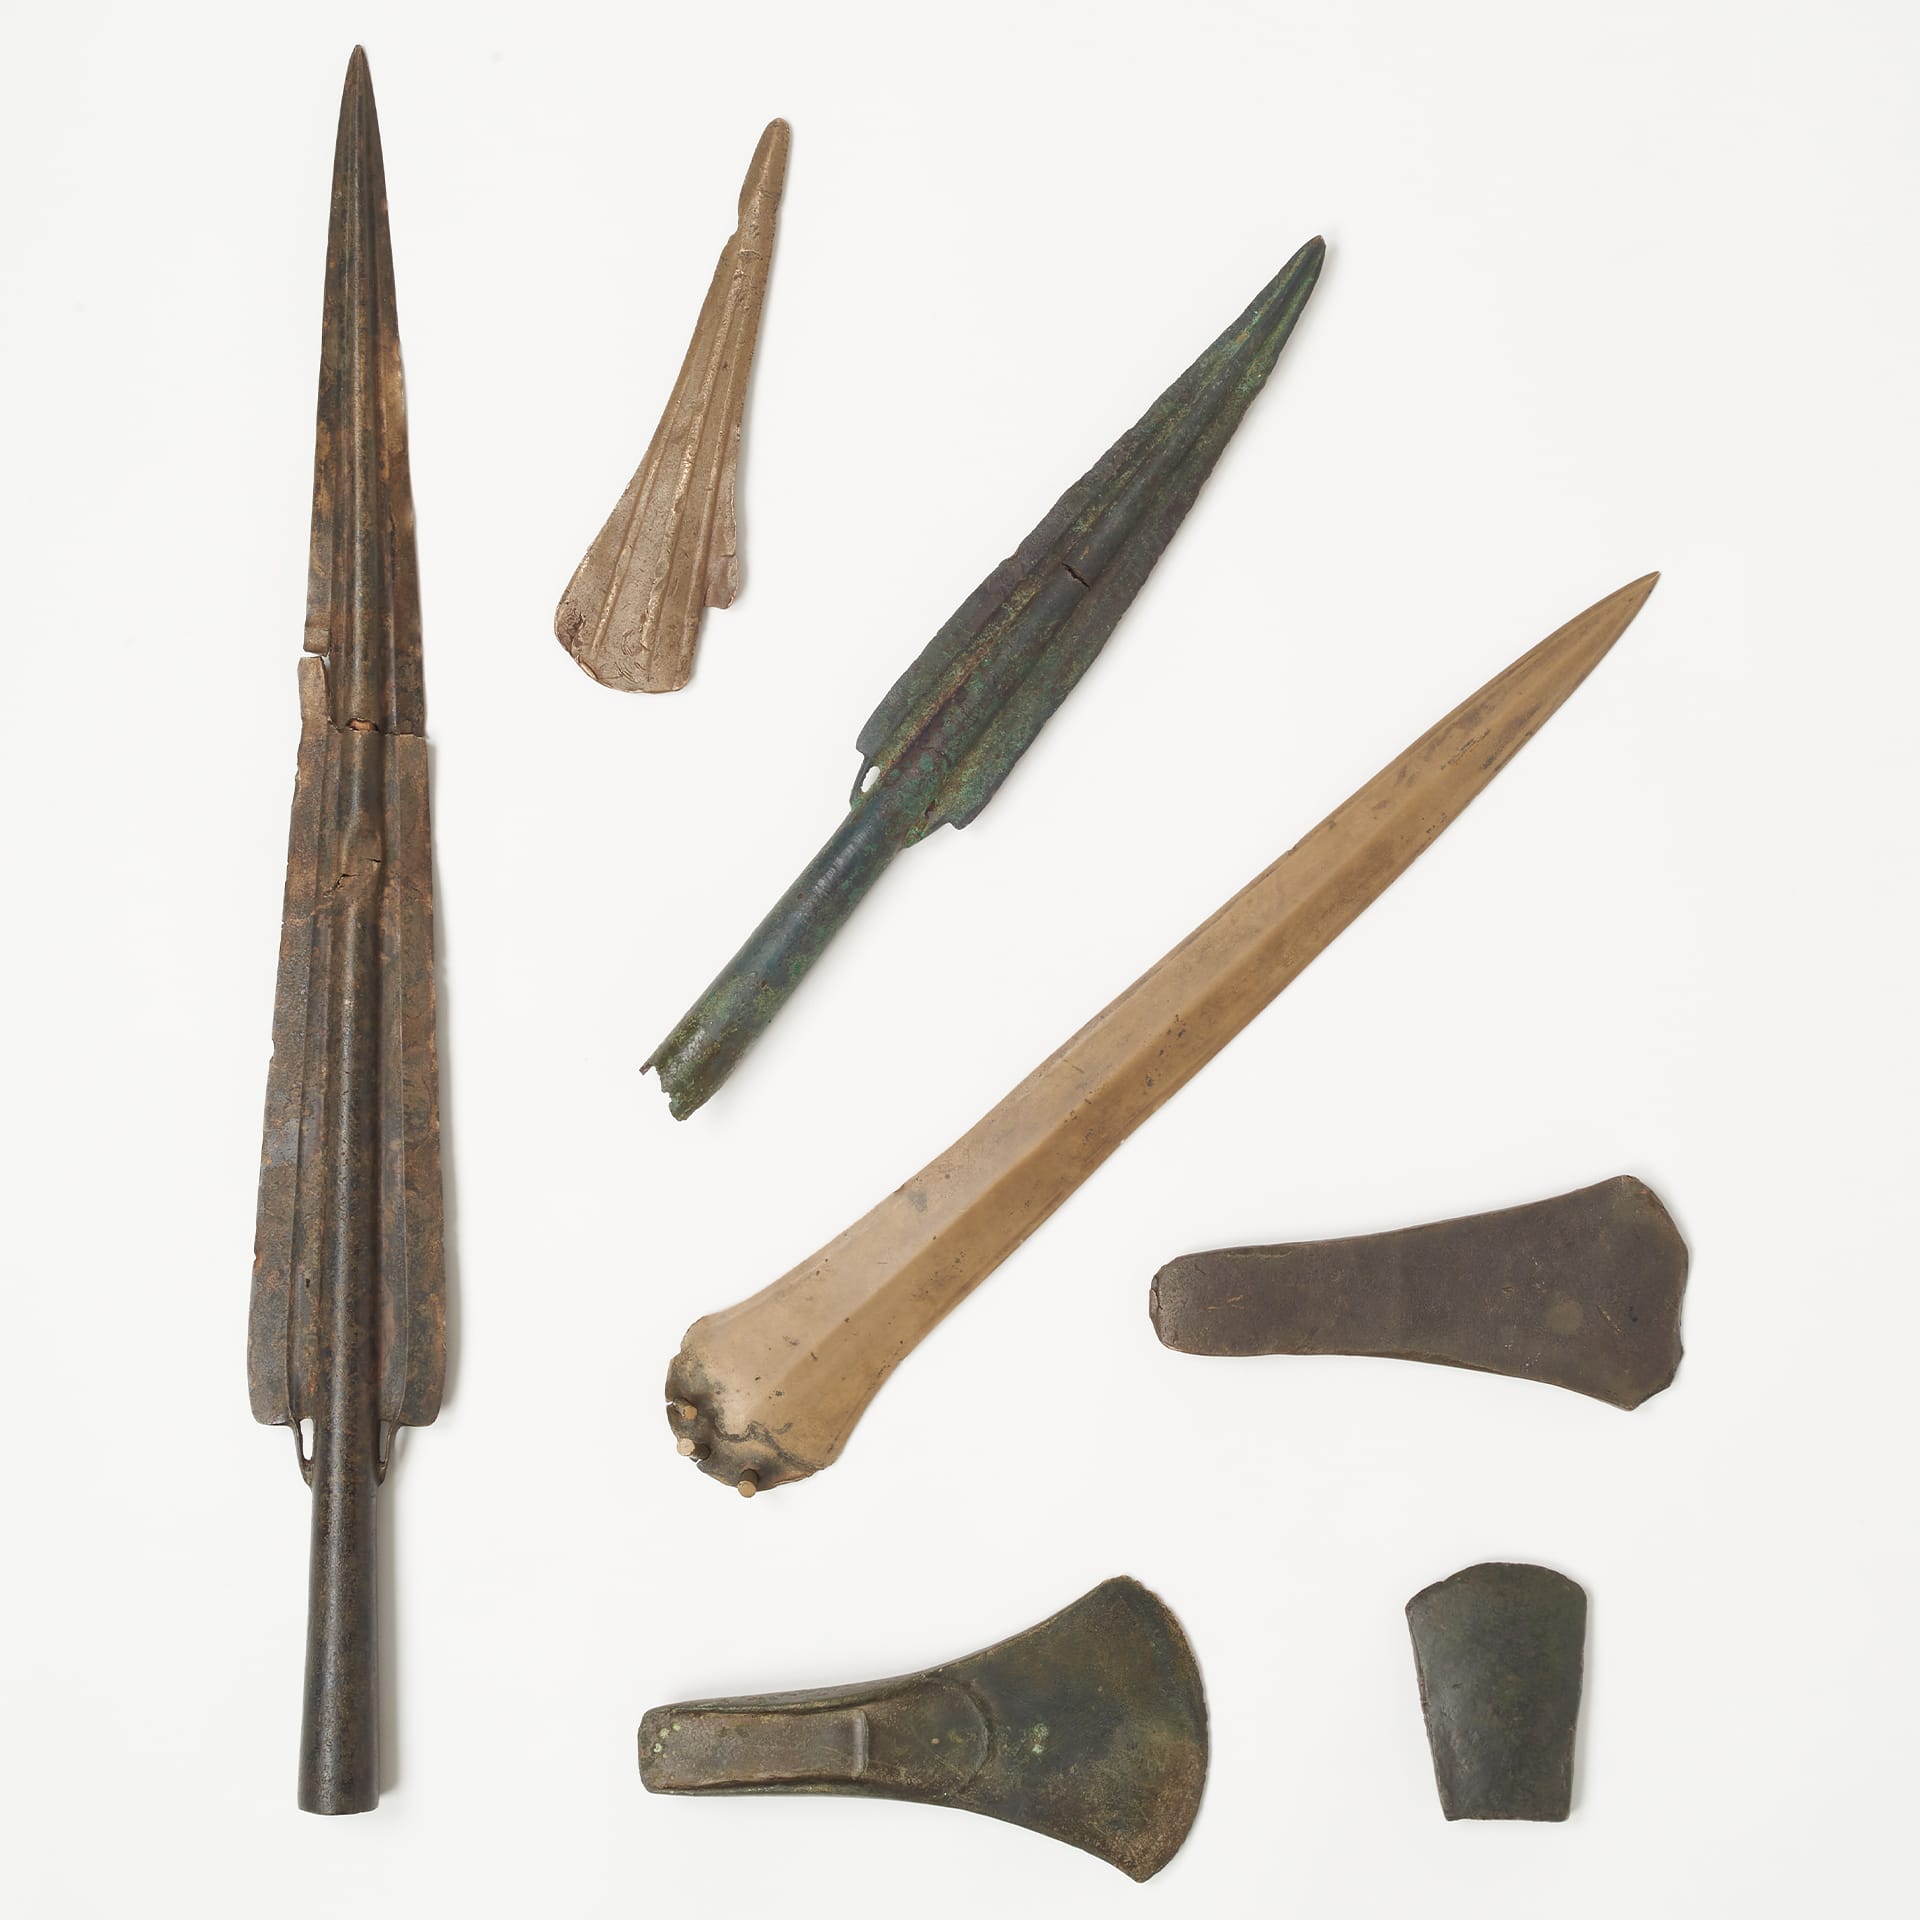 A selection of bronze age artefacts from University of Nottingham